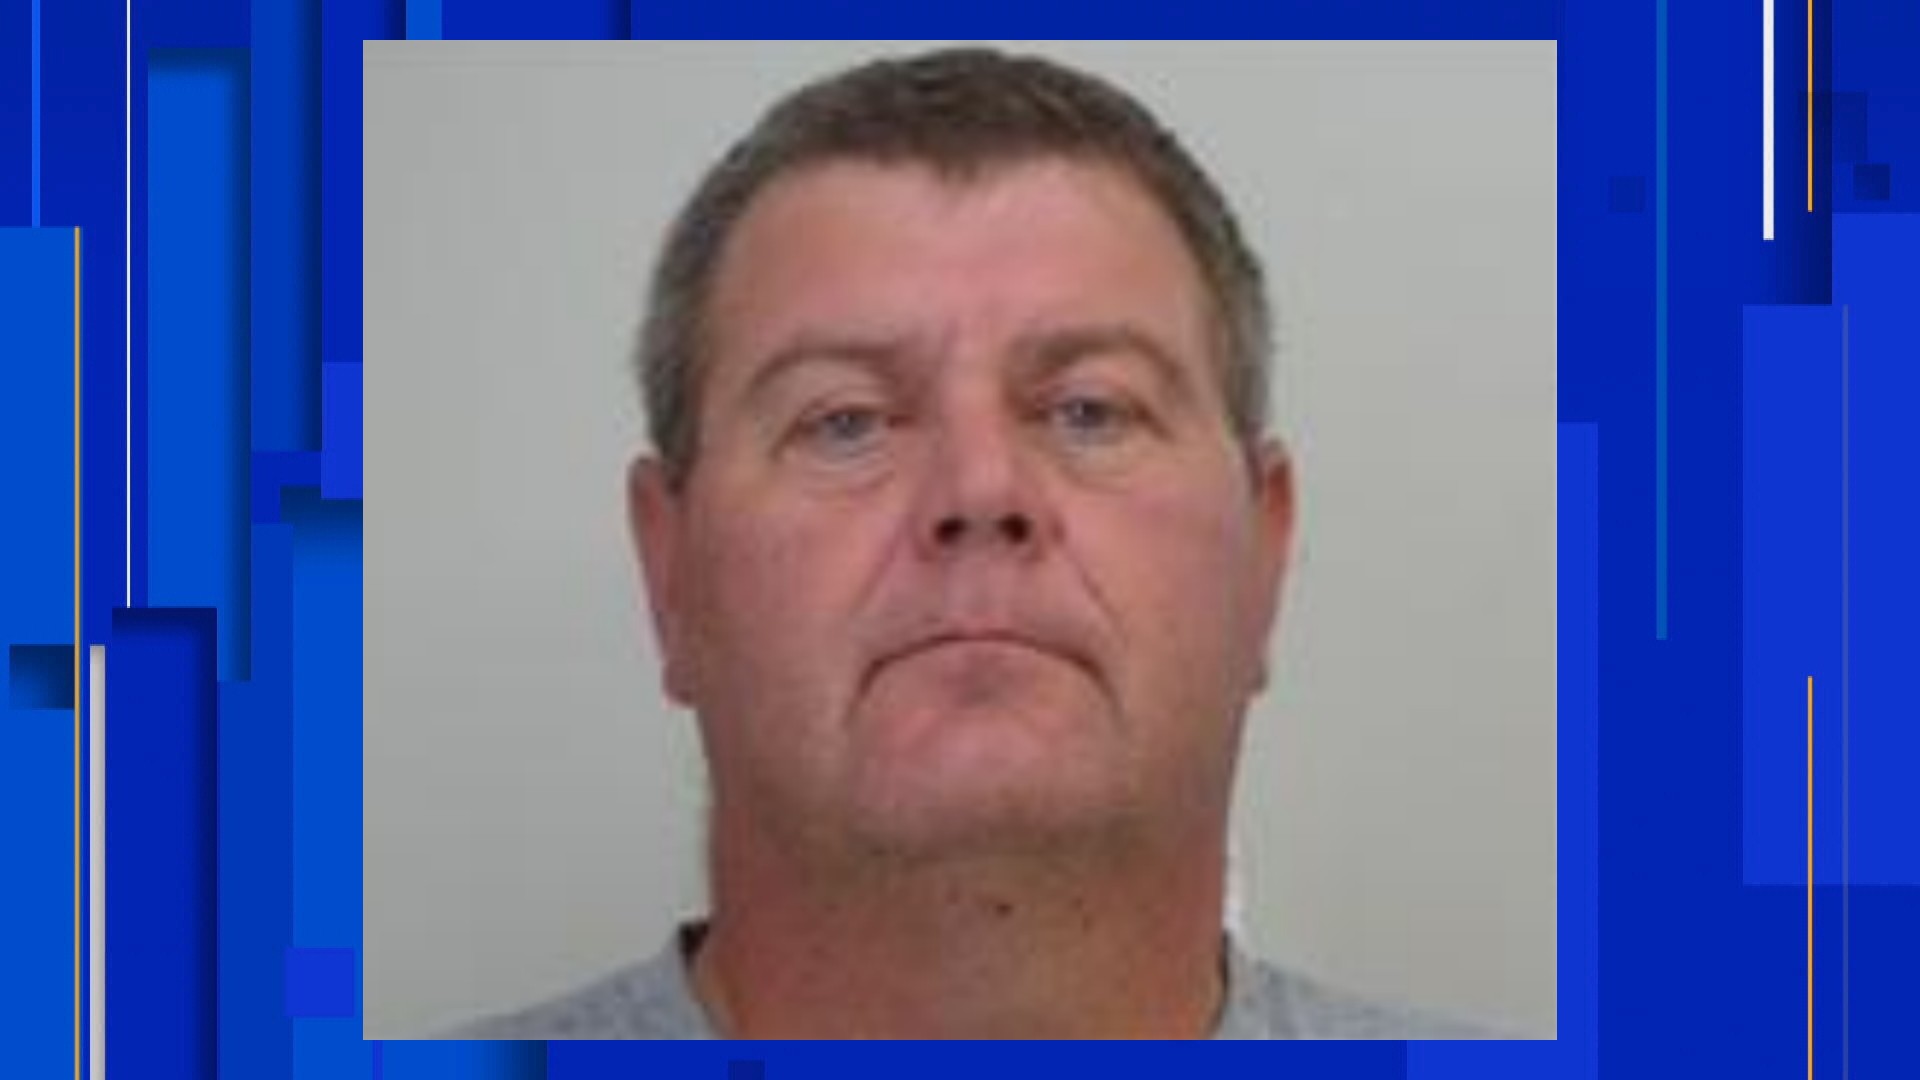 Man arrested for inappropriate relationship with 8-year-old